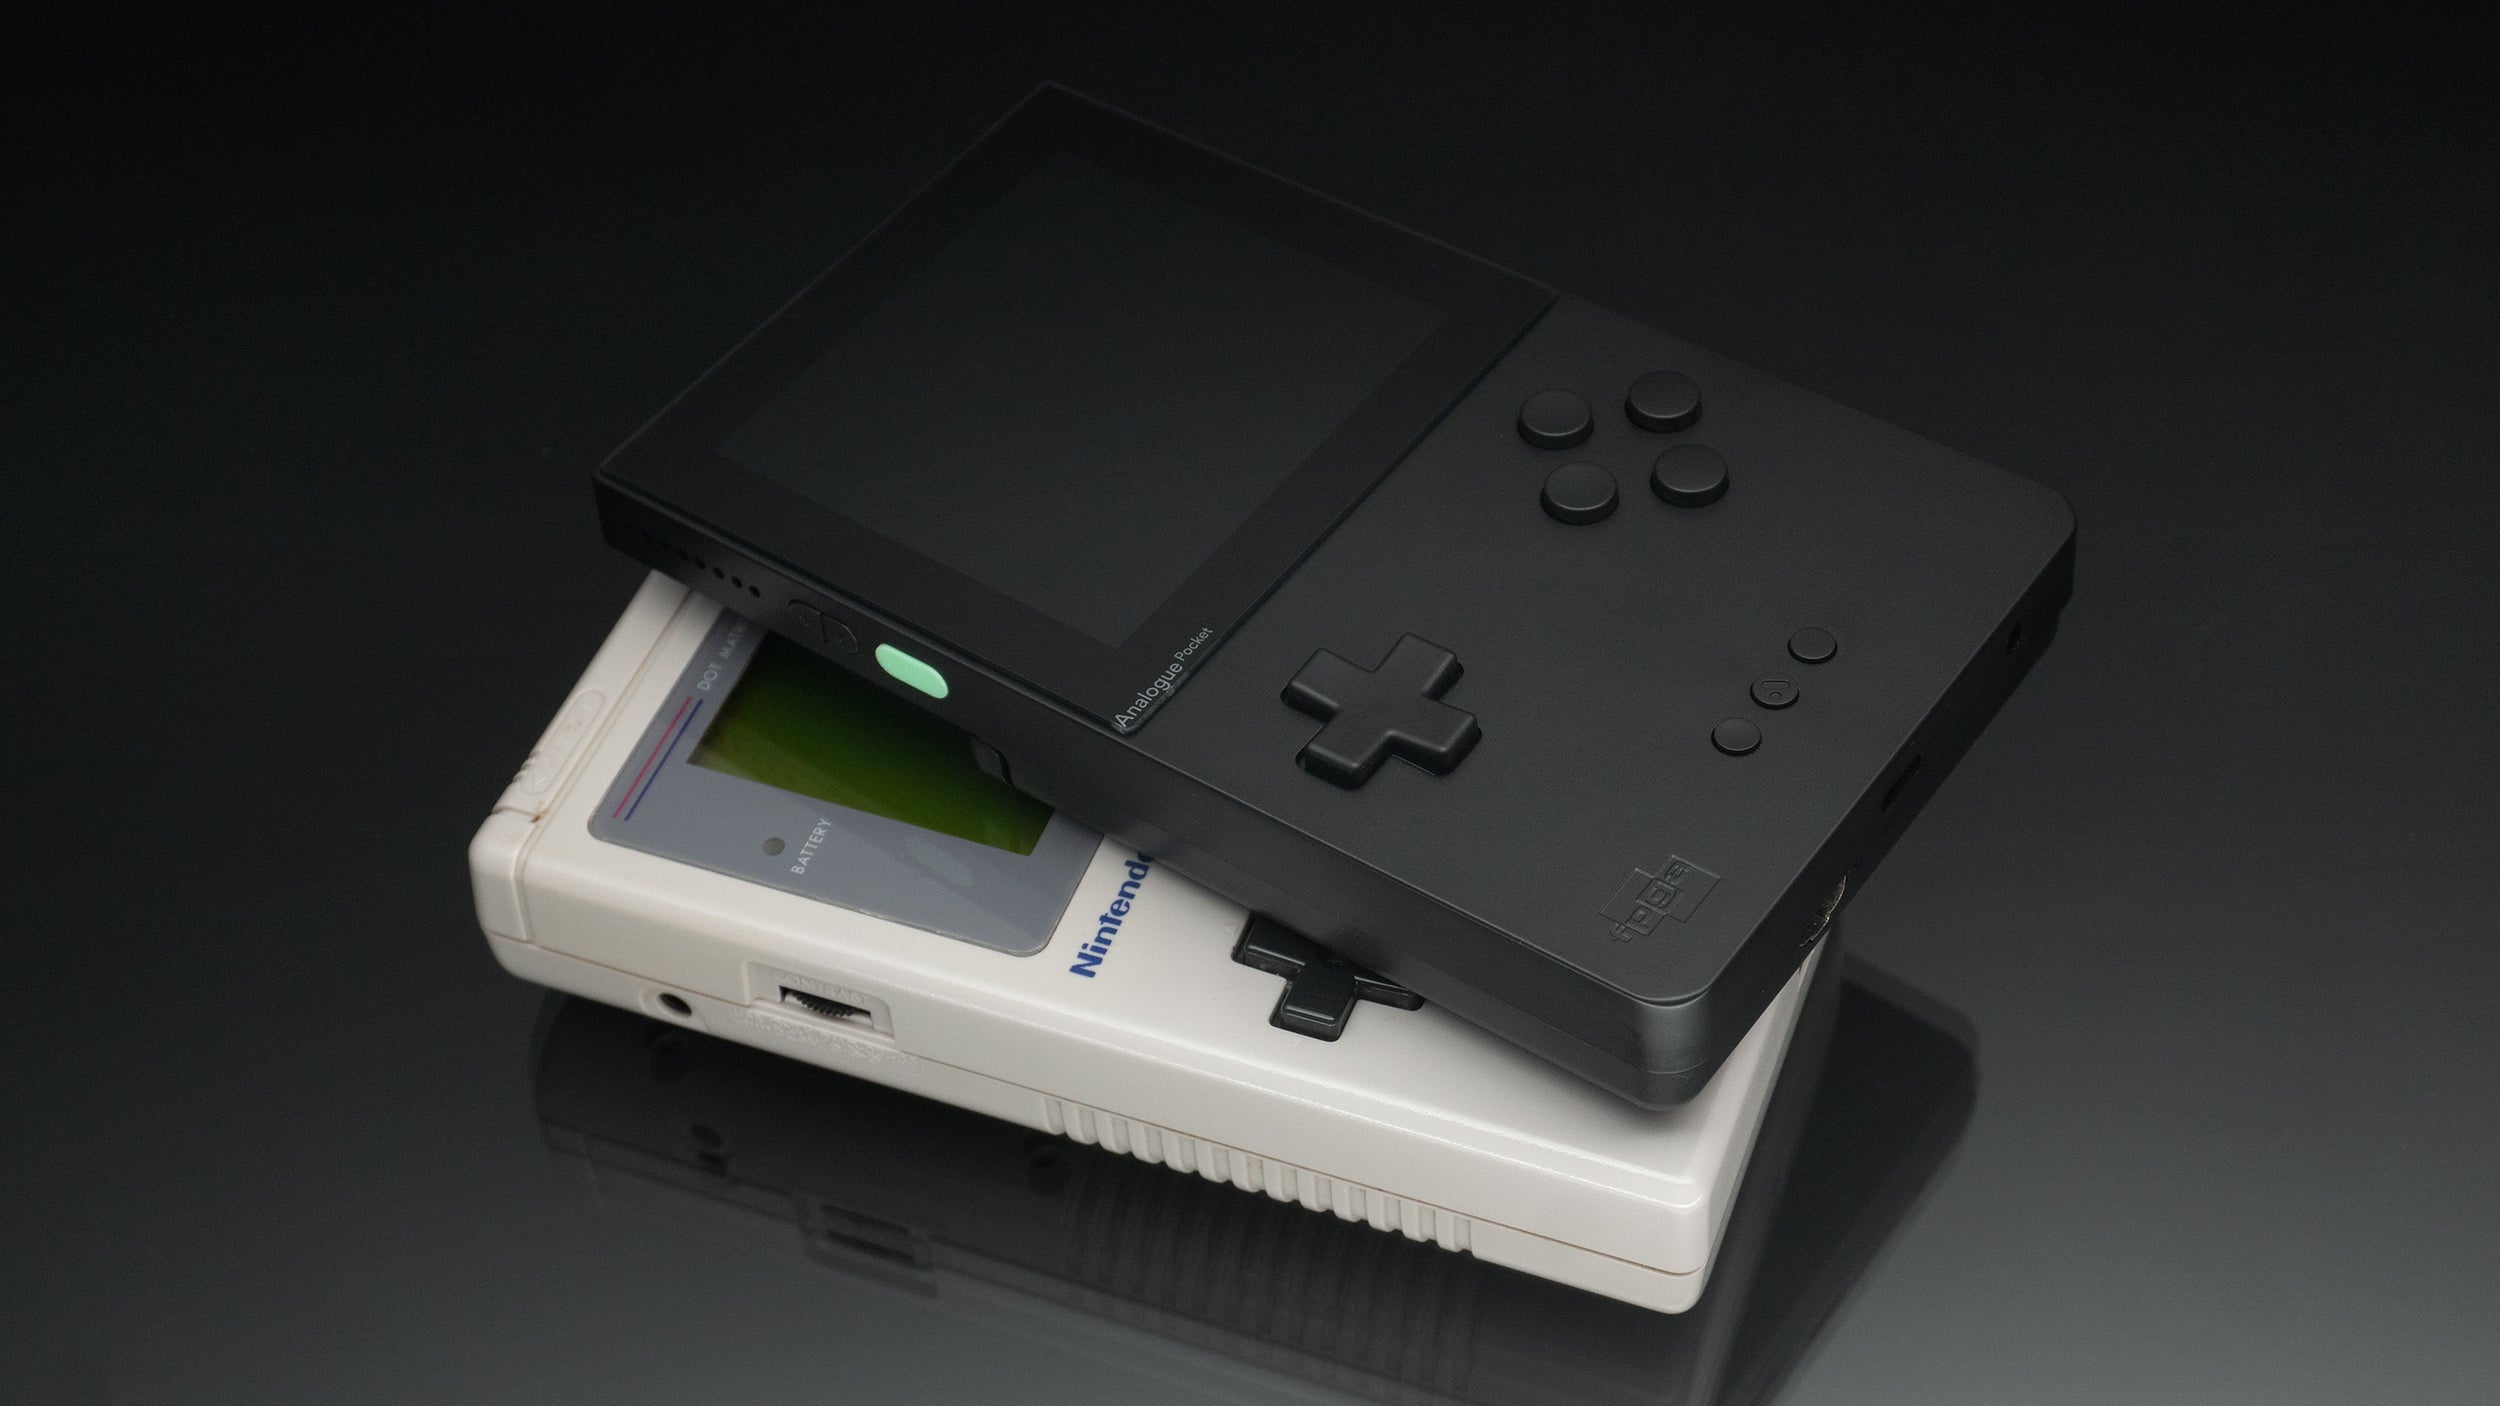 The Analogue Pocket is nearly identical in size to the original Game Boy, but a bit thinner. (Photo: Andrew Liszewski/Gizmodo)